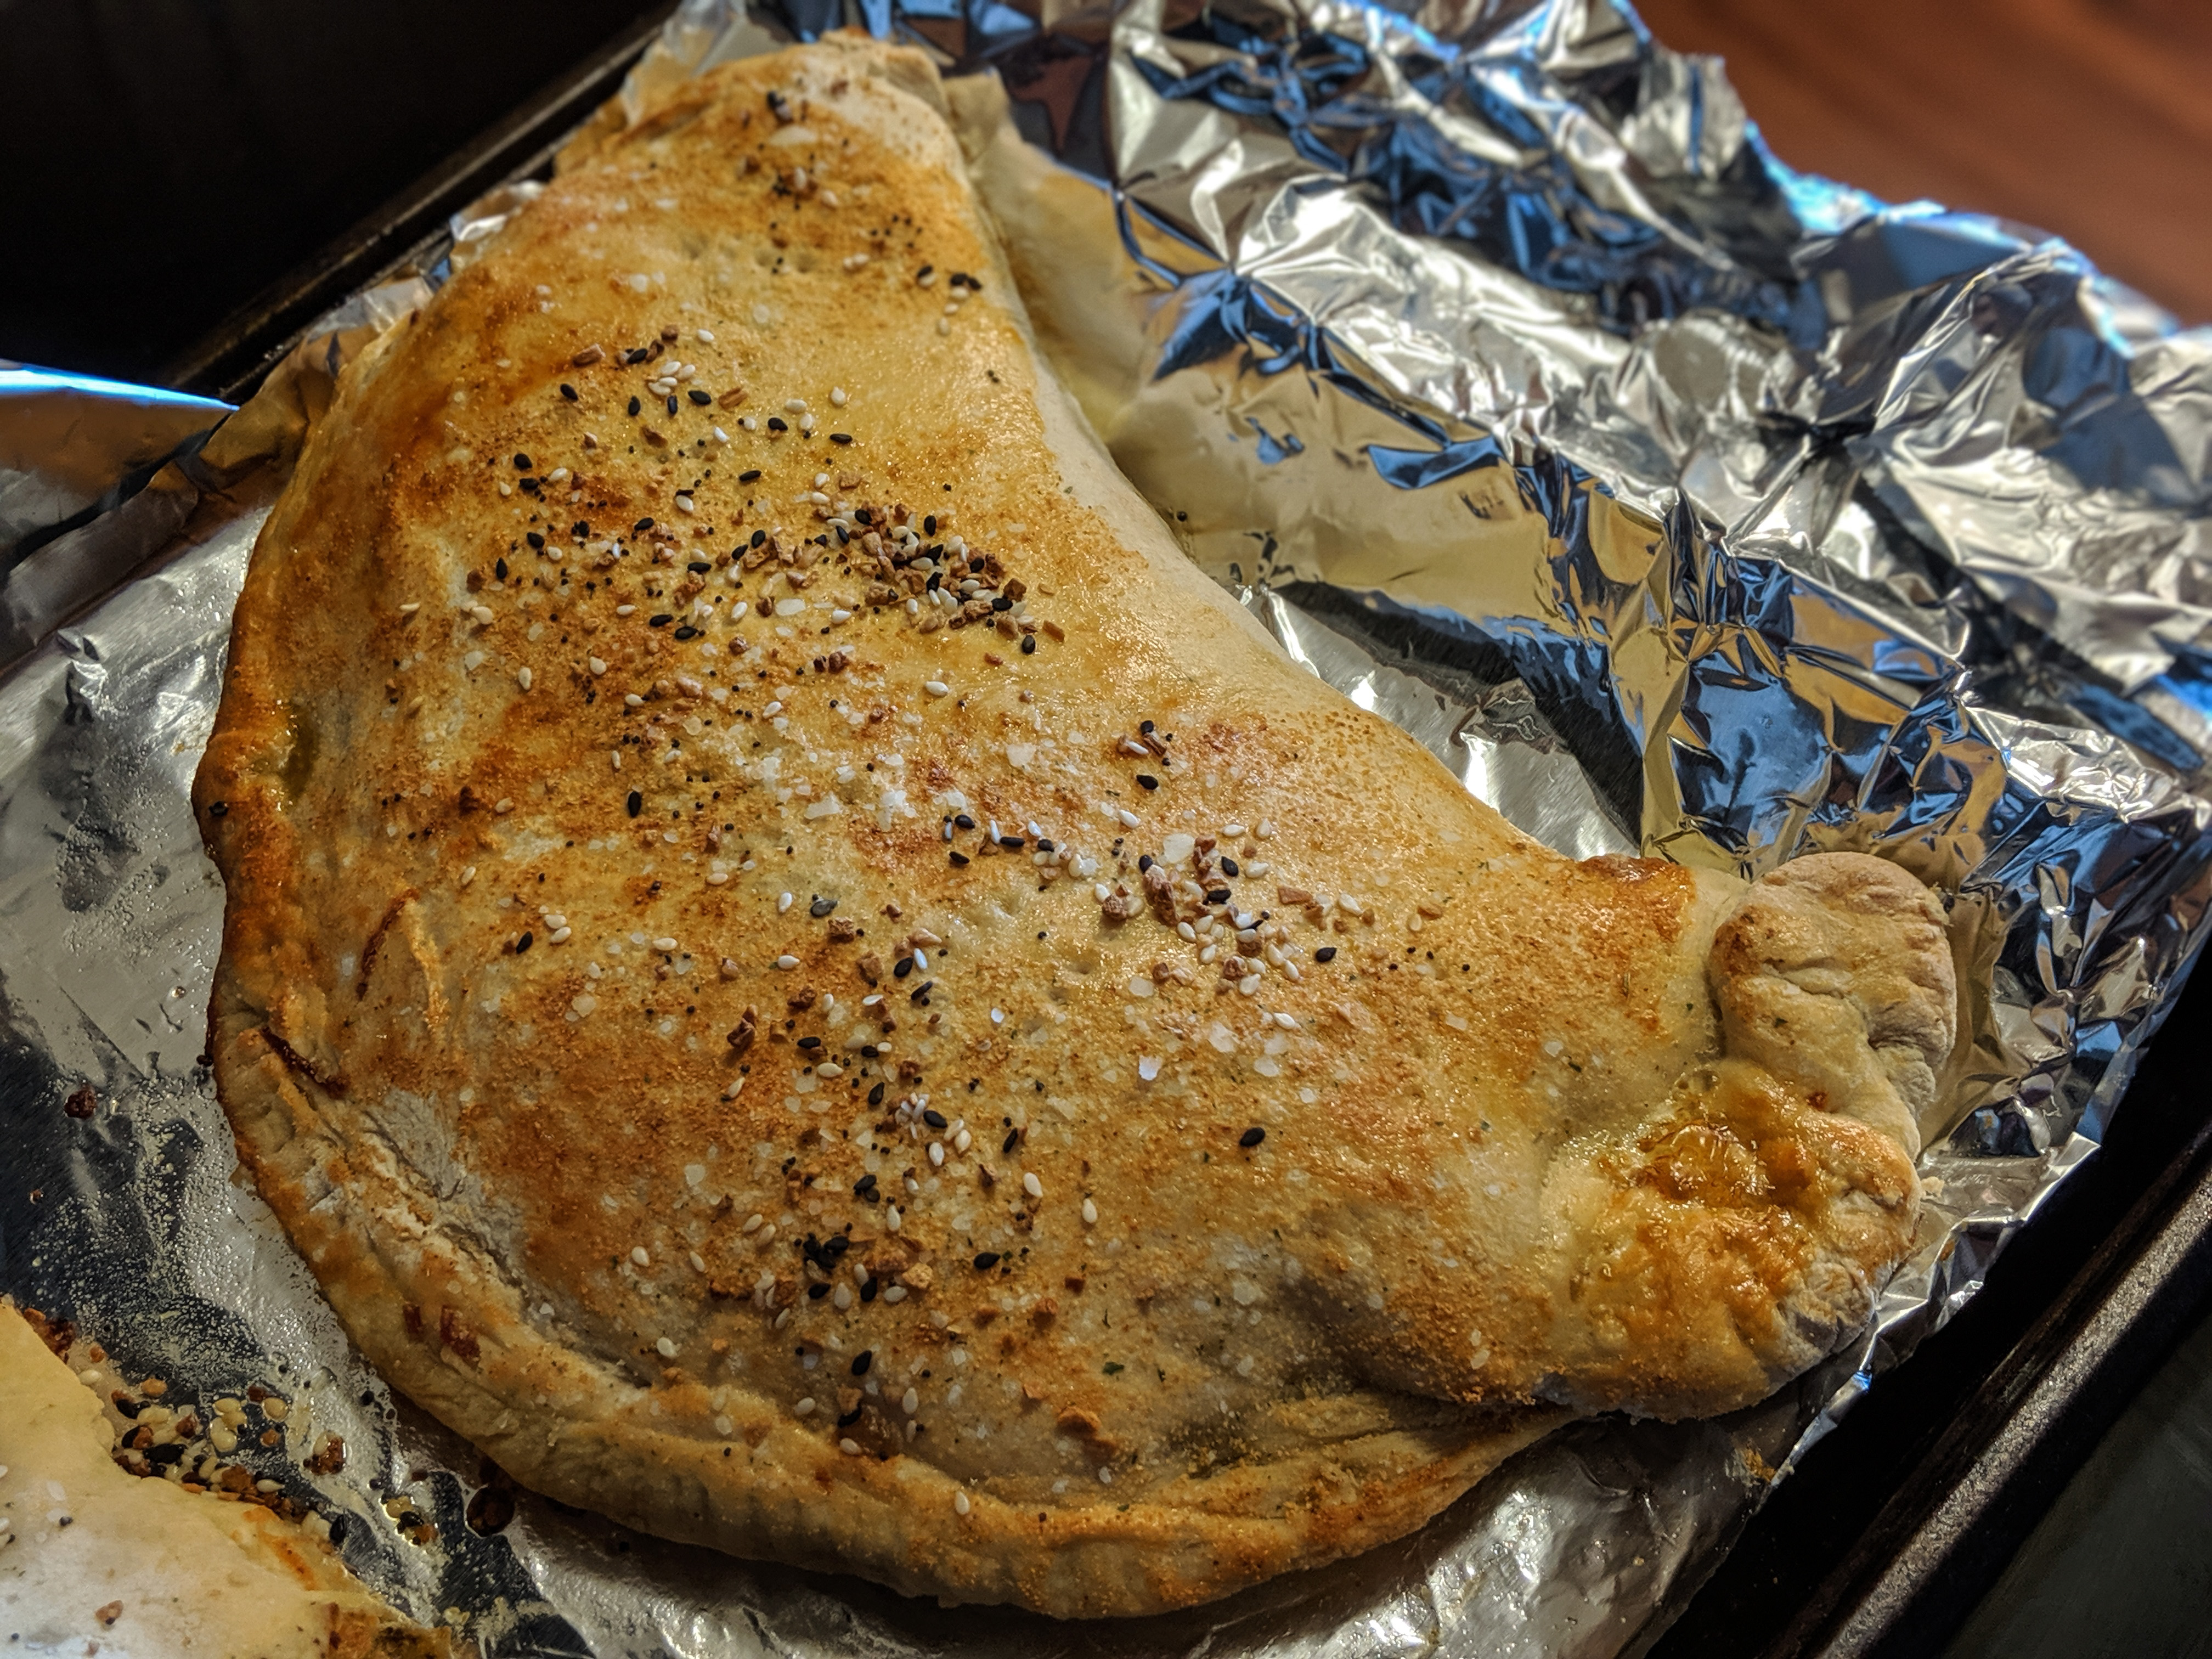 a calzone ala new orleans style